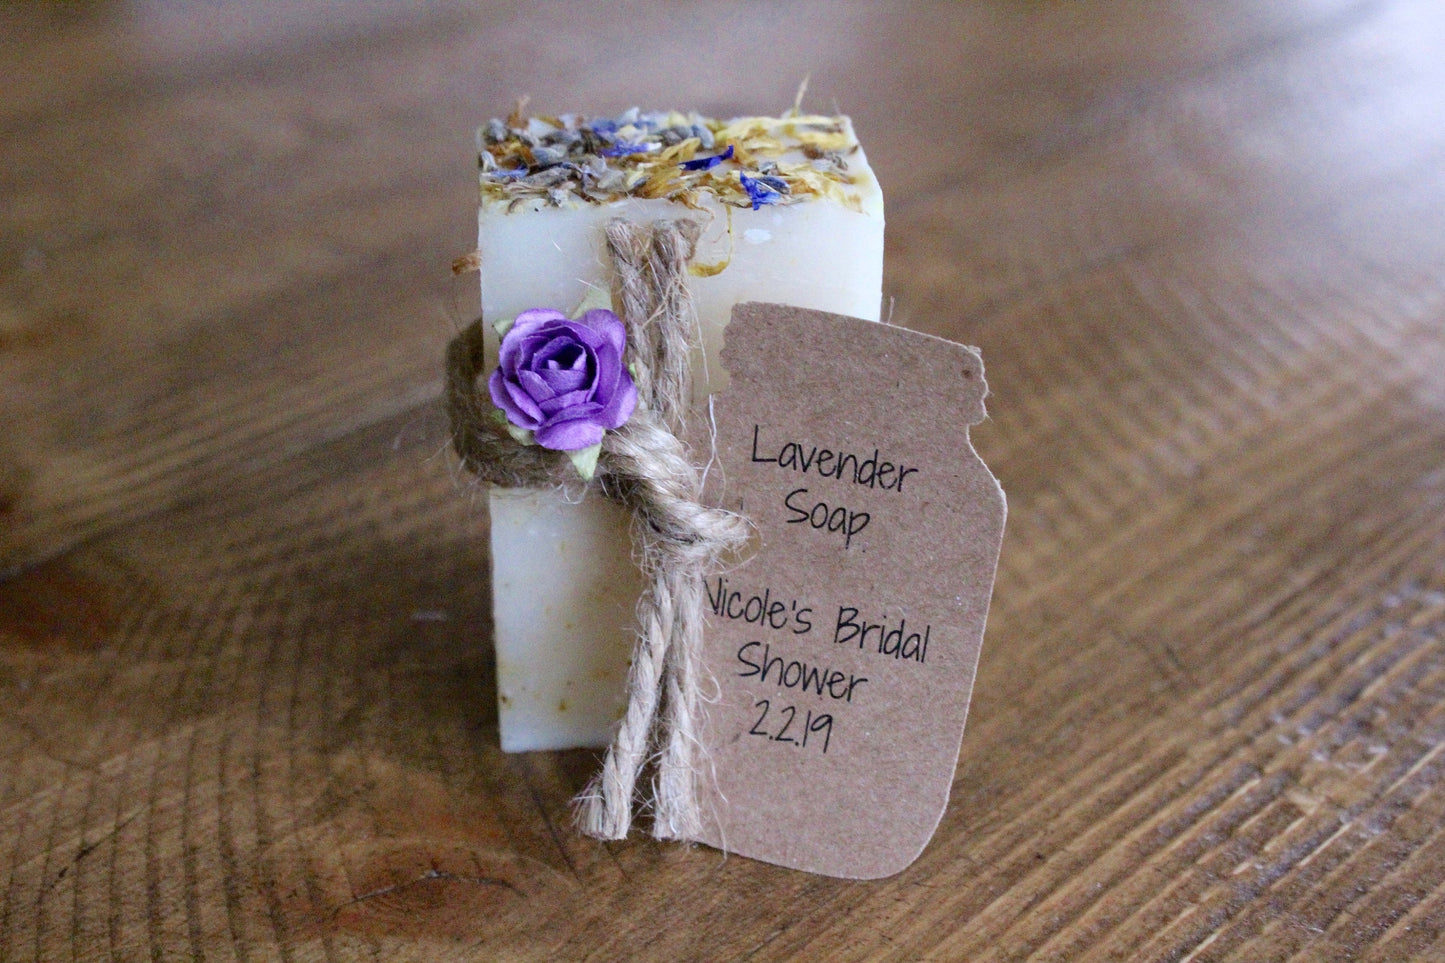 Bridal Shower Favors Personalized Wedding Favors Bridal Shower Soap Favors Soap Favors Lavender Wedding Favors Bridal Shower Favors Soap